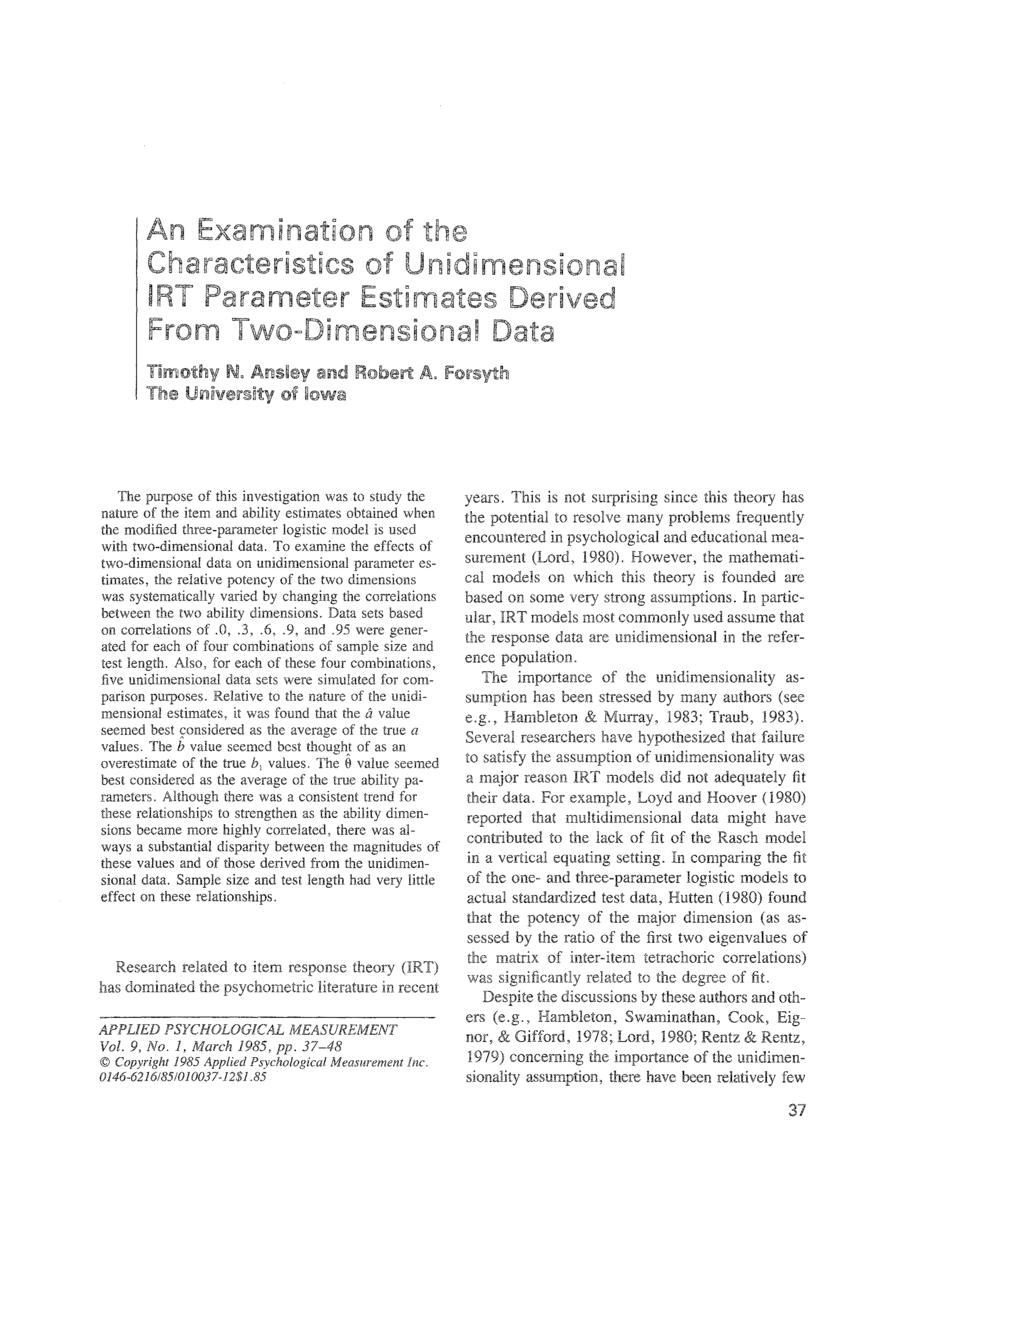 An Examination of the Characteristics of Unidimensional IRT Parameter Estimates Derived From Two-Dimensional Data Timothy N. Ansley and Robert A.